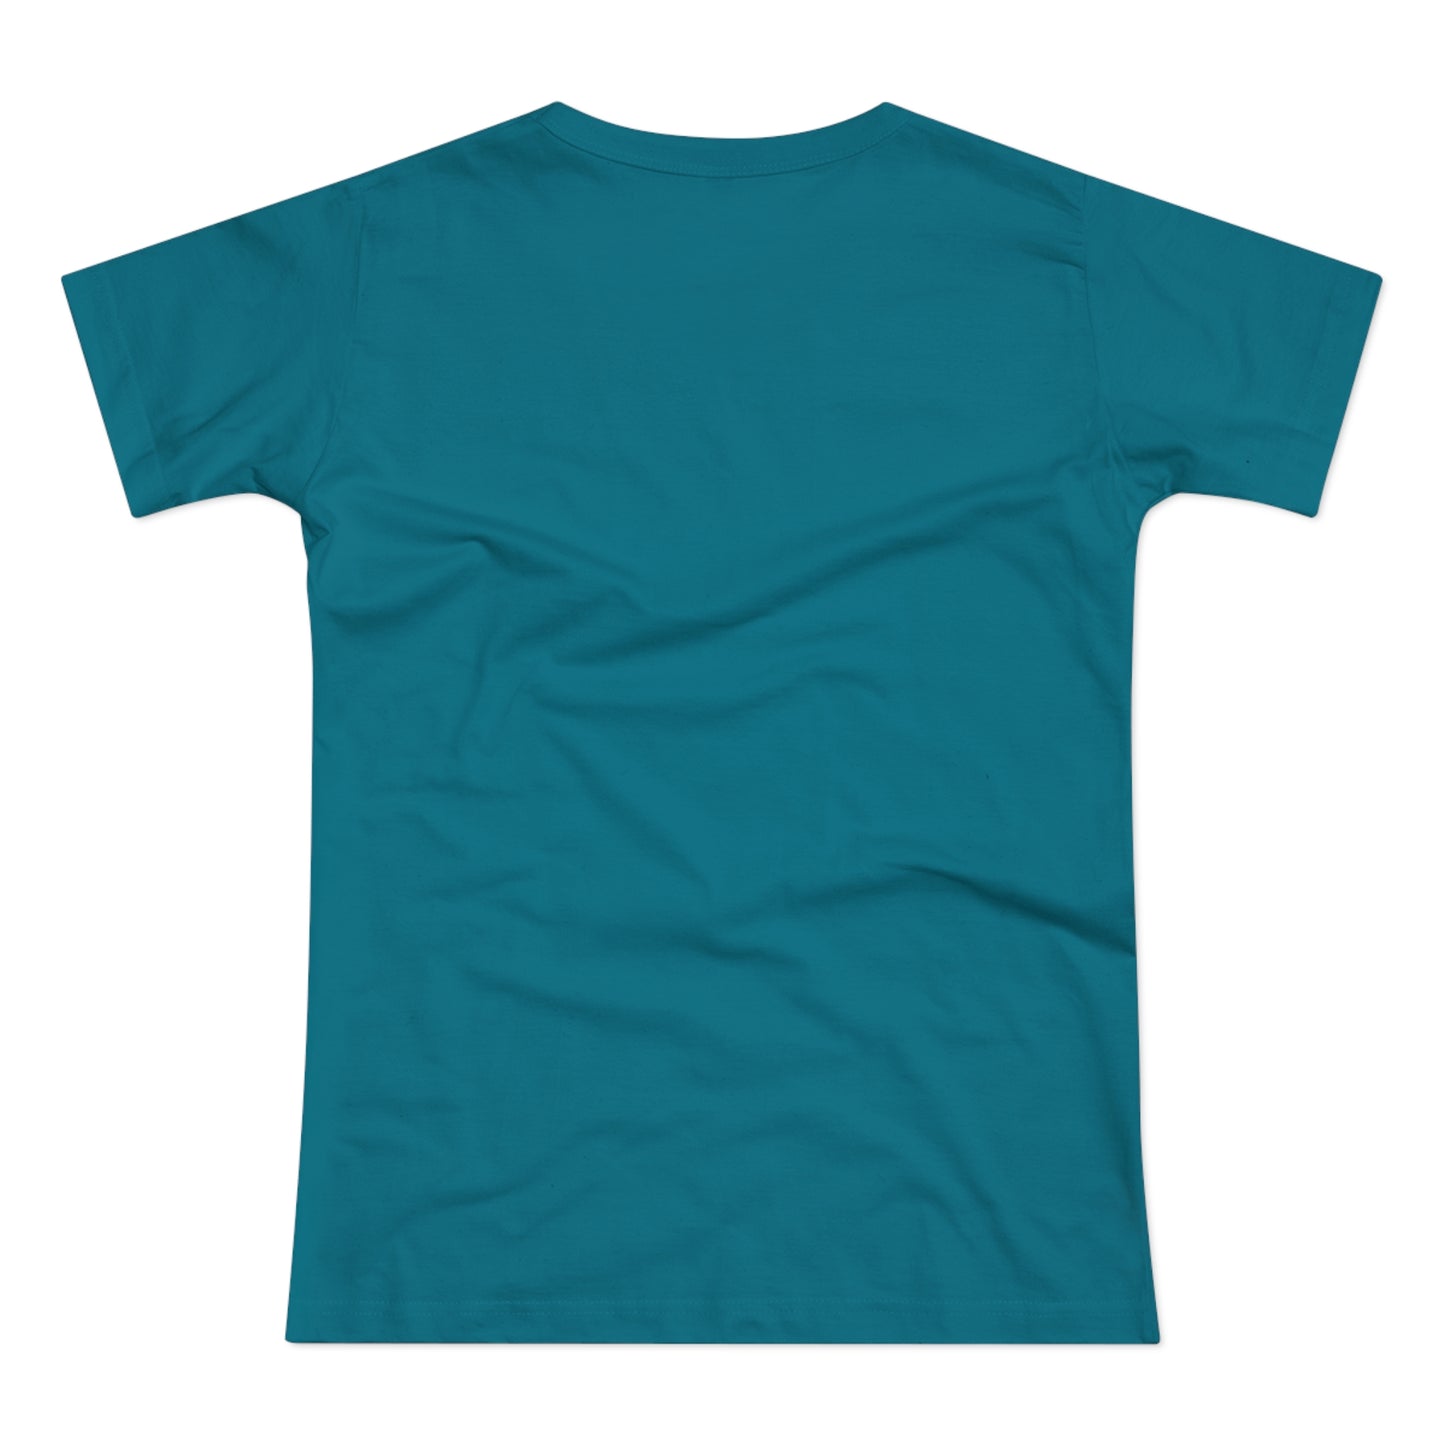 a teal t - shirt with a white background